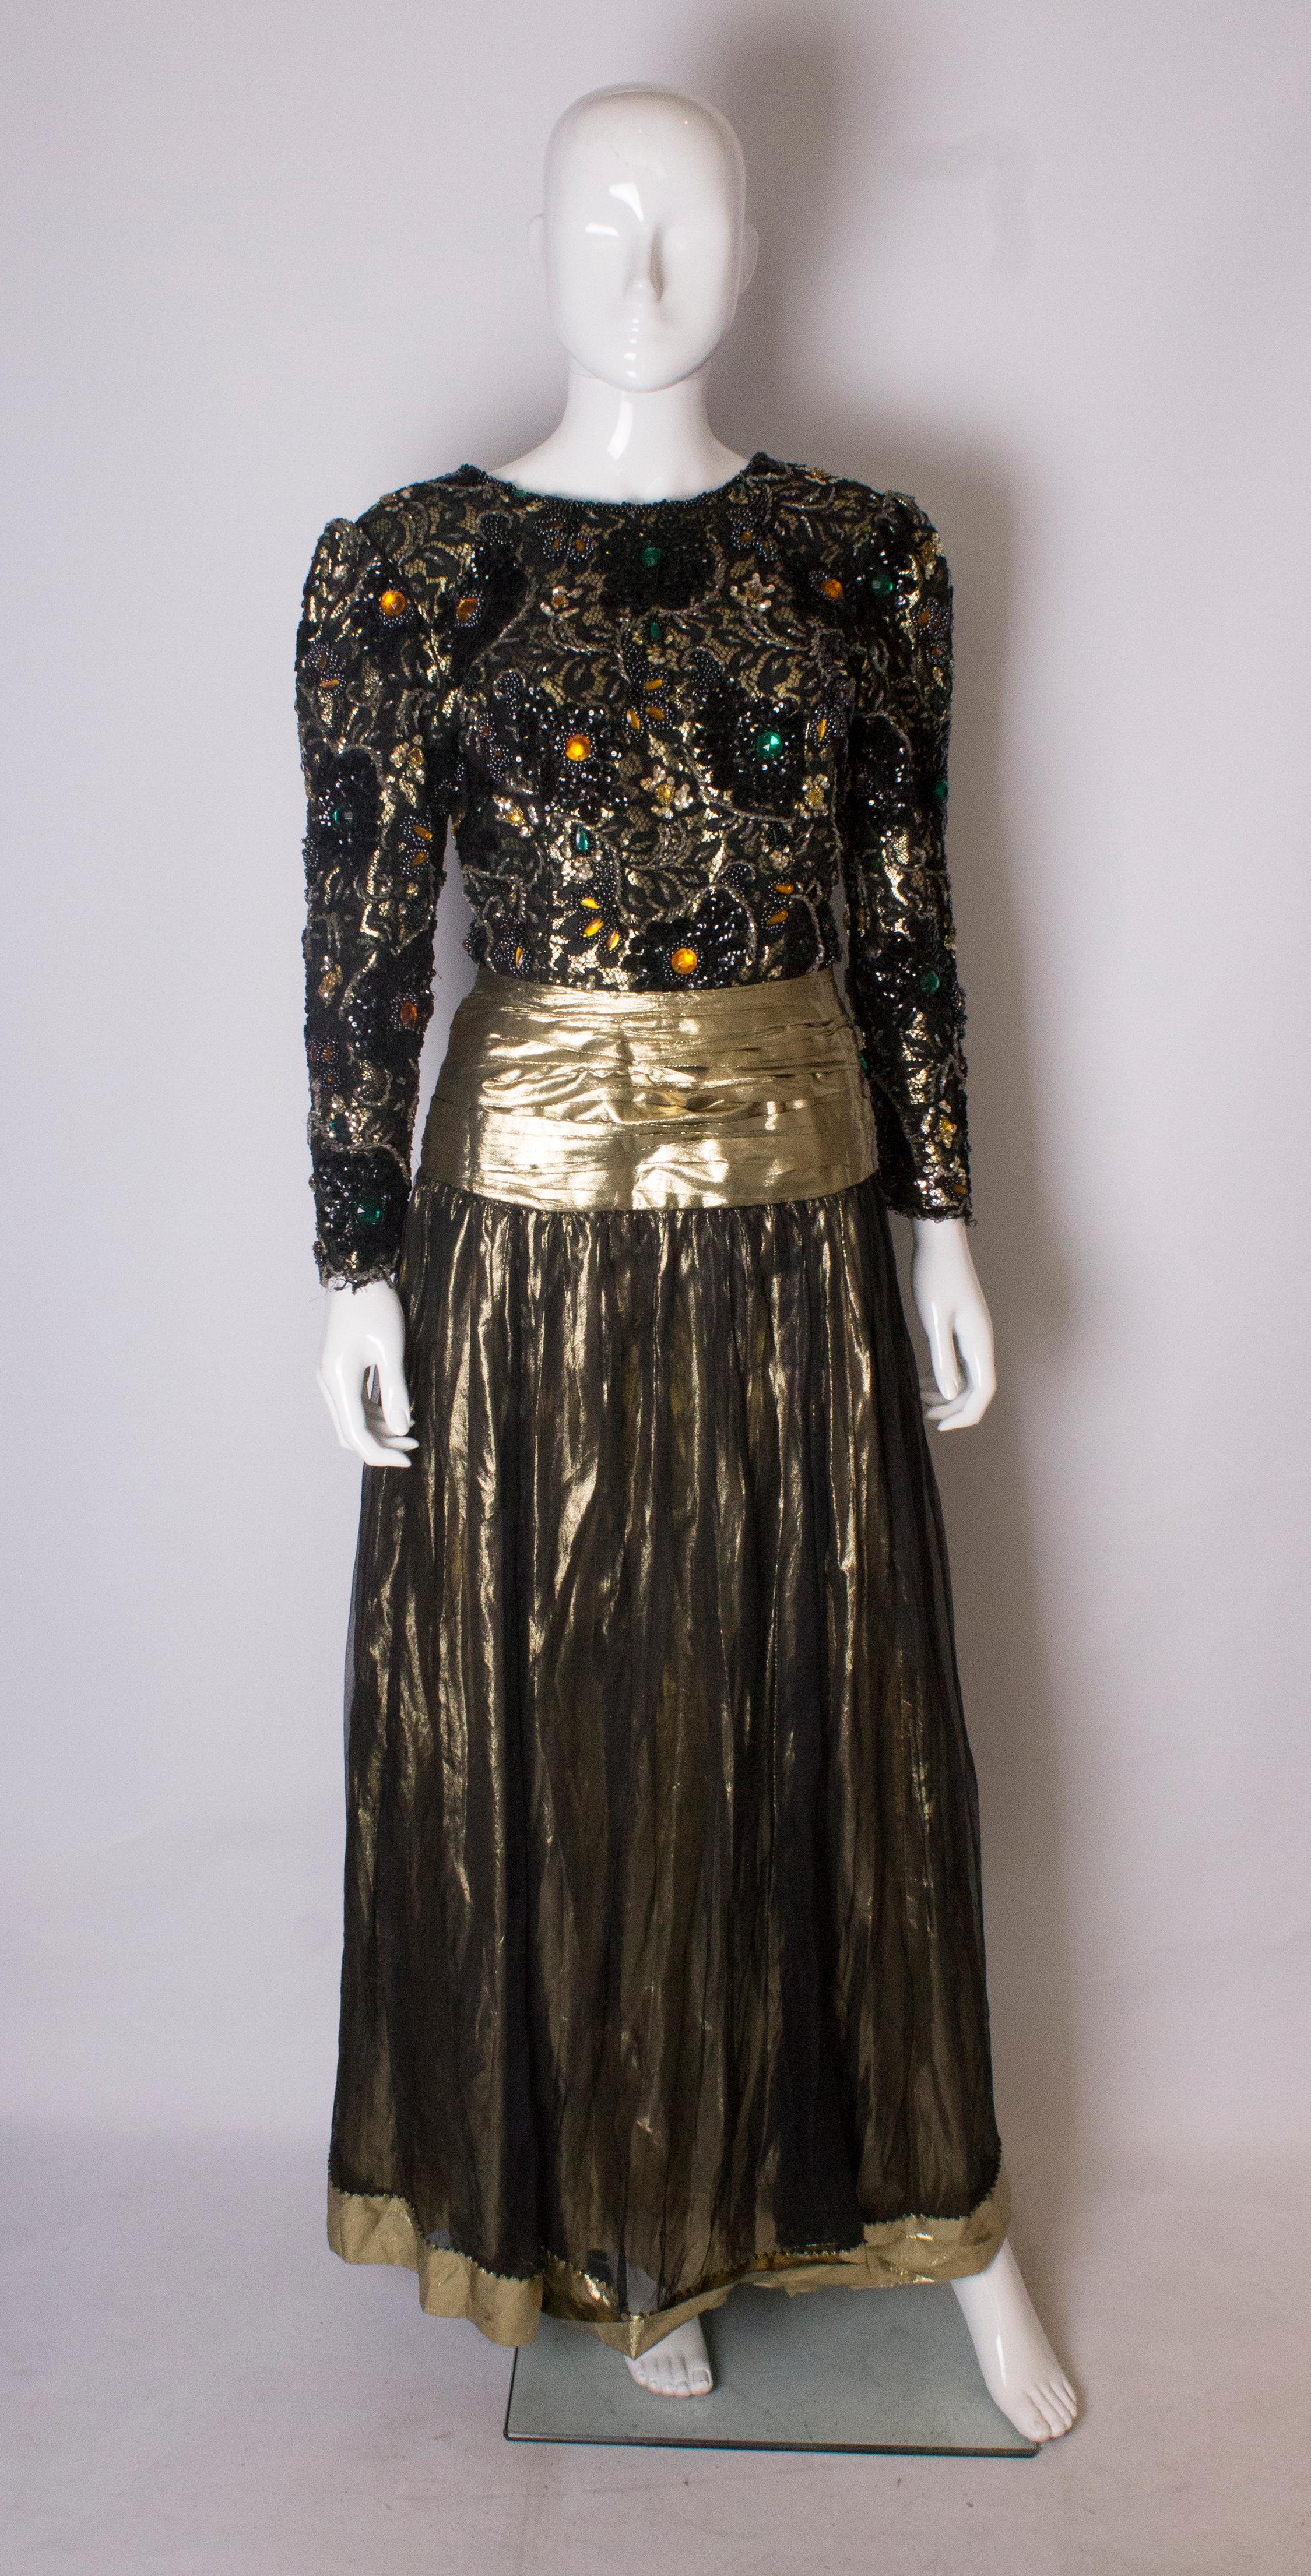 A head turning evening gown from the 1980s. The dress has a heavily beaded top part with a deep v backline. The waist area is in a gold fabric , and the gathered skirt is a light black fabric over a gold lame underskirt.